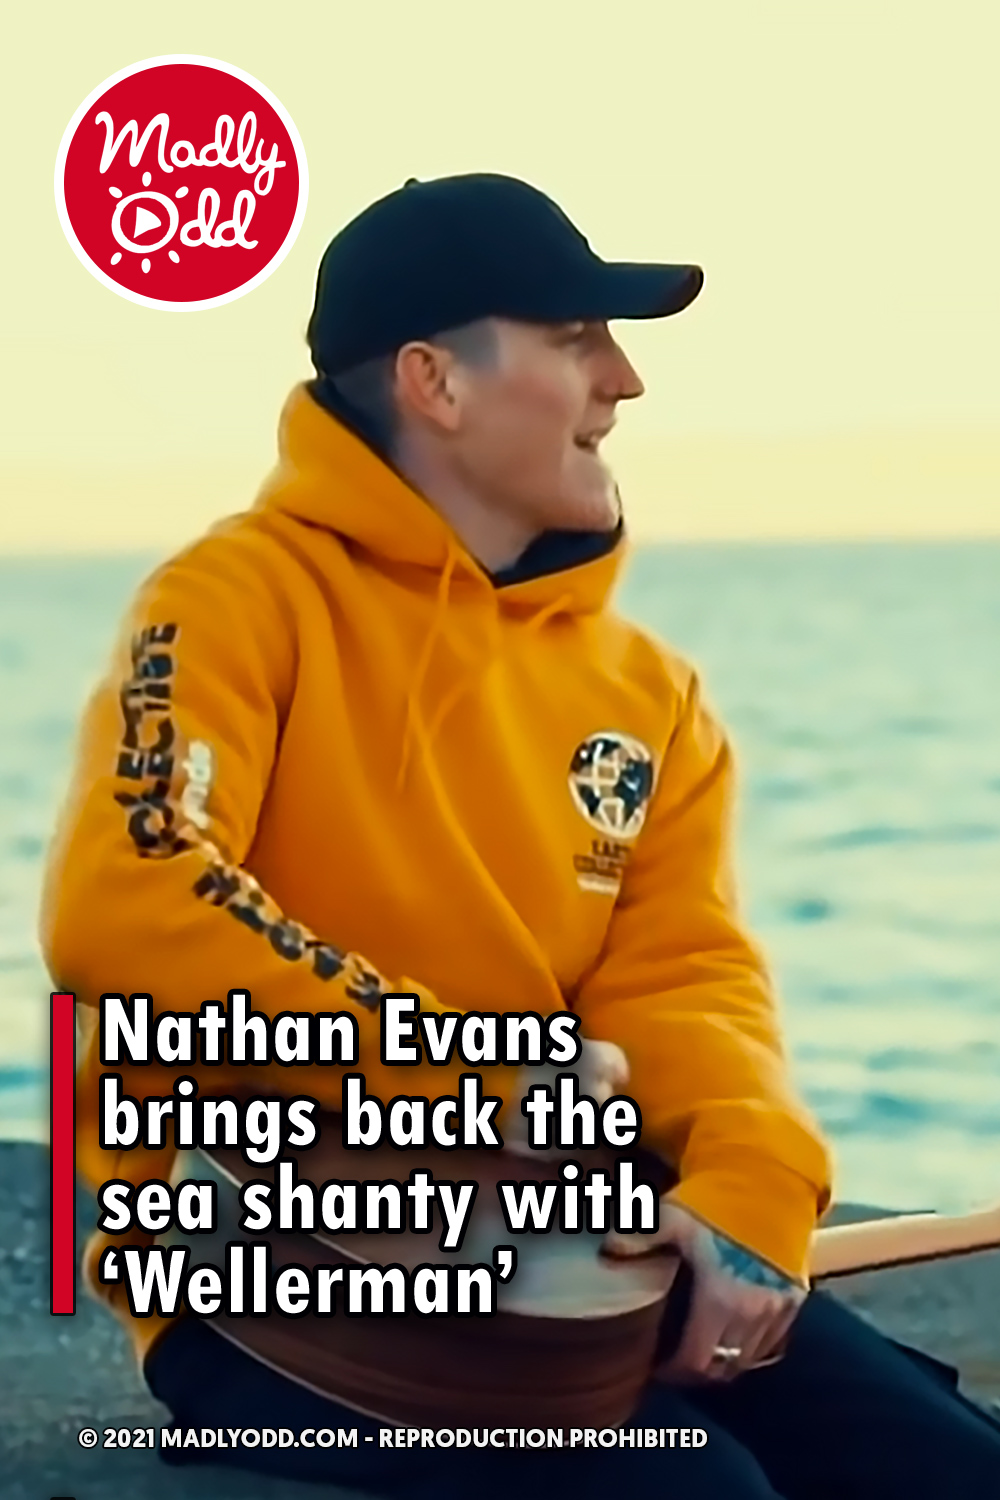 Nathan Evans brings back the sea shanty with ‘Wellerman’